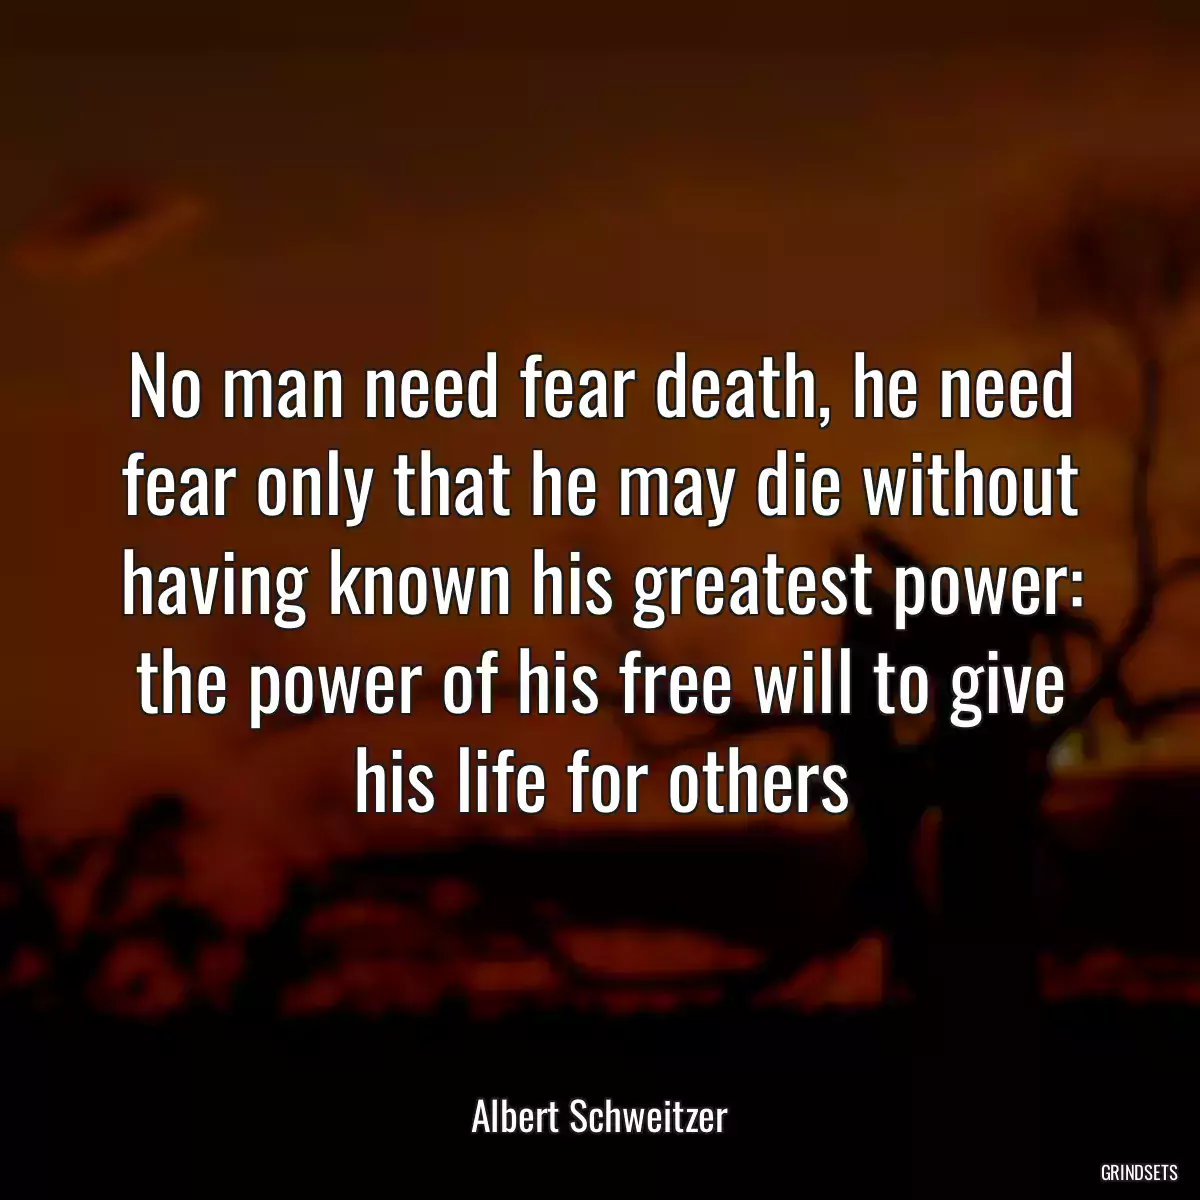 No man need fear death, he need fear only that he may die without having known his greatest power: the power of his free will to give his life for others